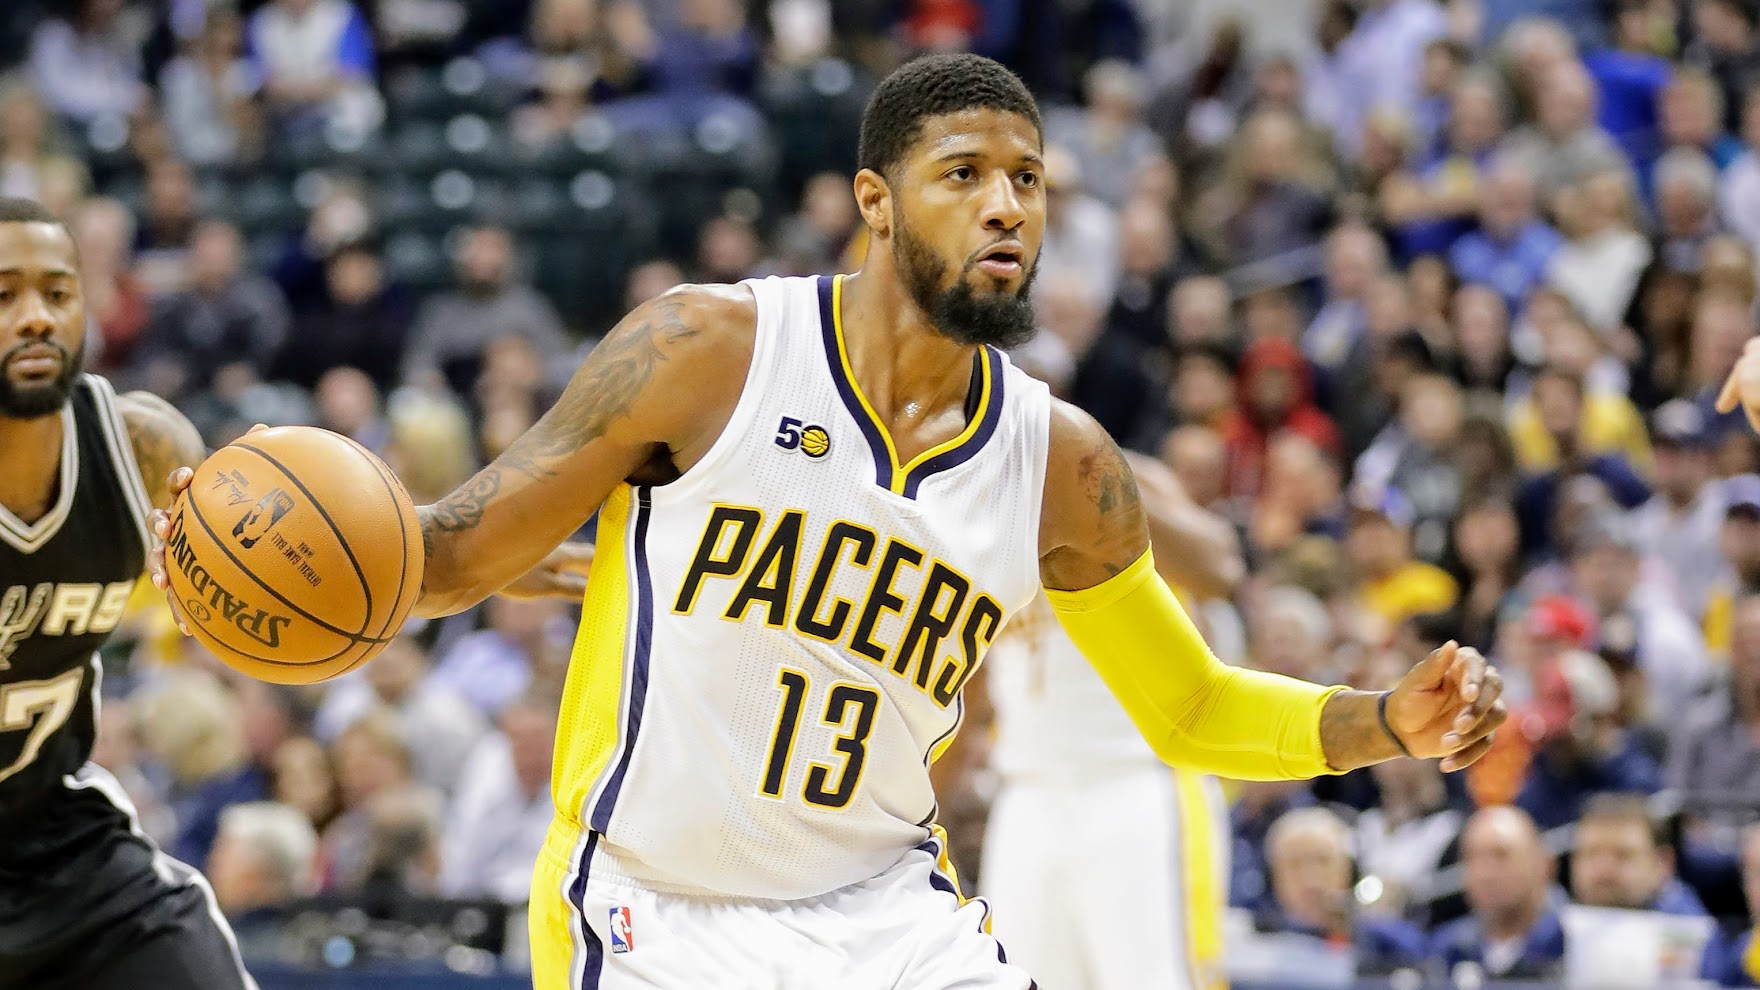 Indiana Pacers on X: First look at @Yg_Trece in his